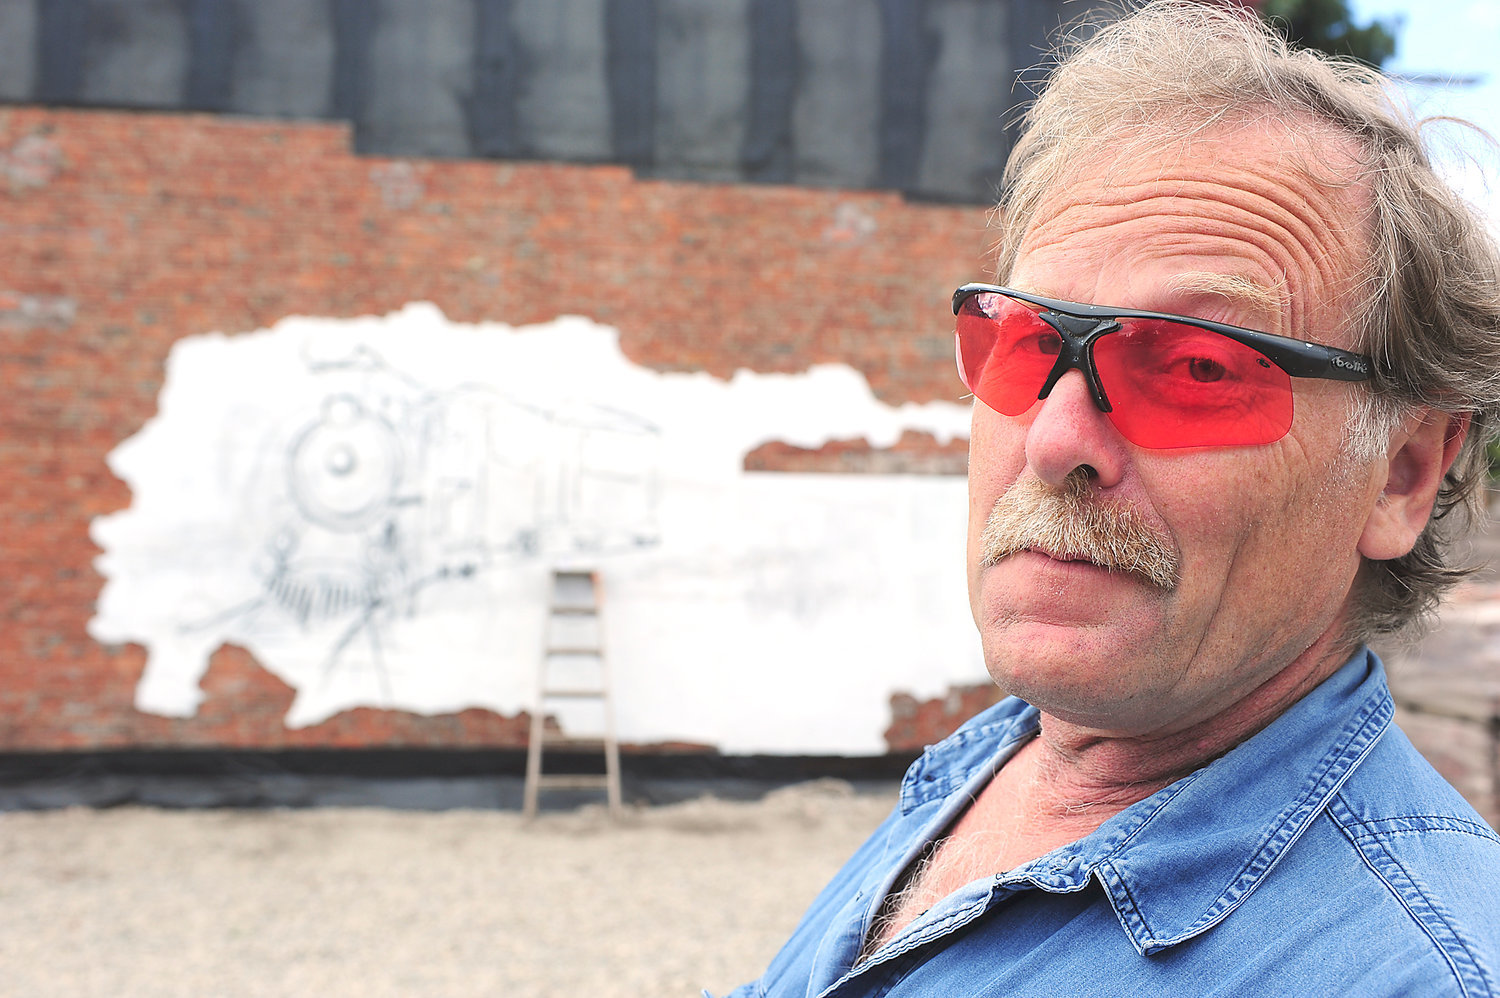 Hank Claycamp takes a minute to describe the concept behind the mural he was working on on the side of a buliding on Tower Avenue in Centralia in this 2012 Chronicle file photo.